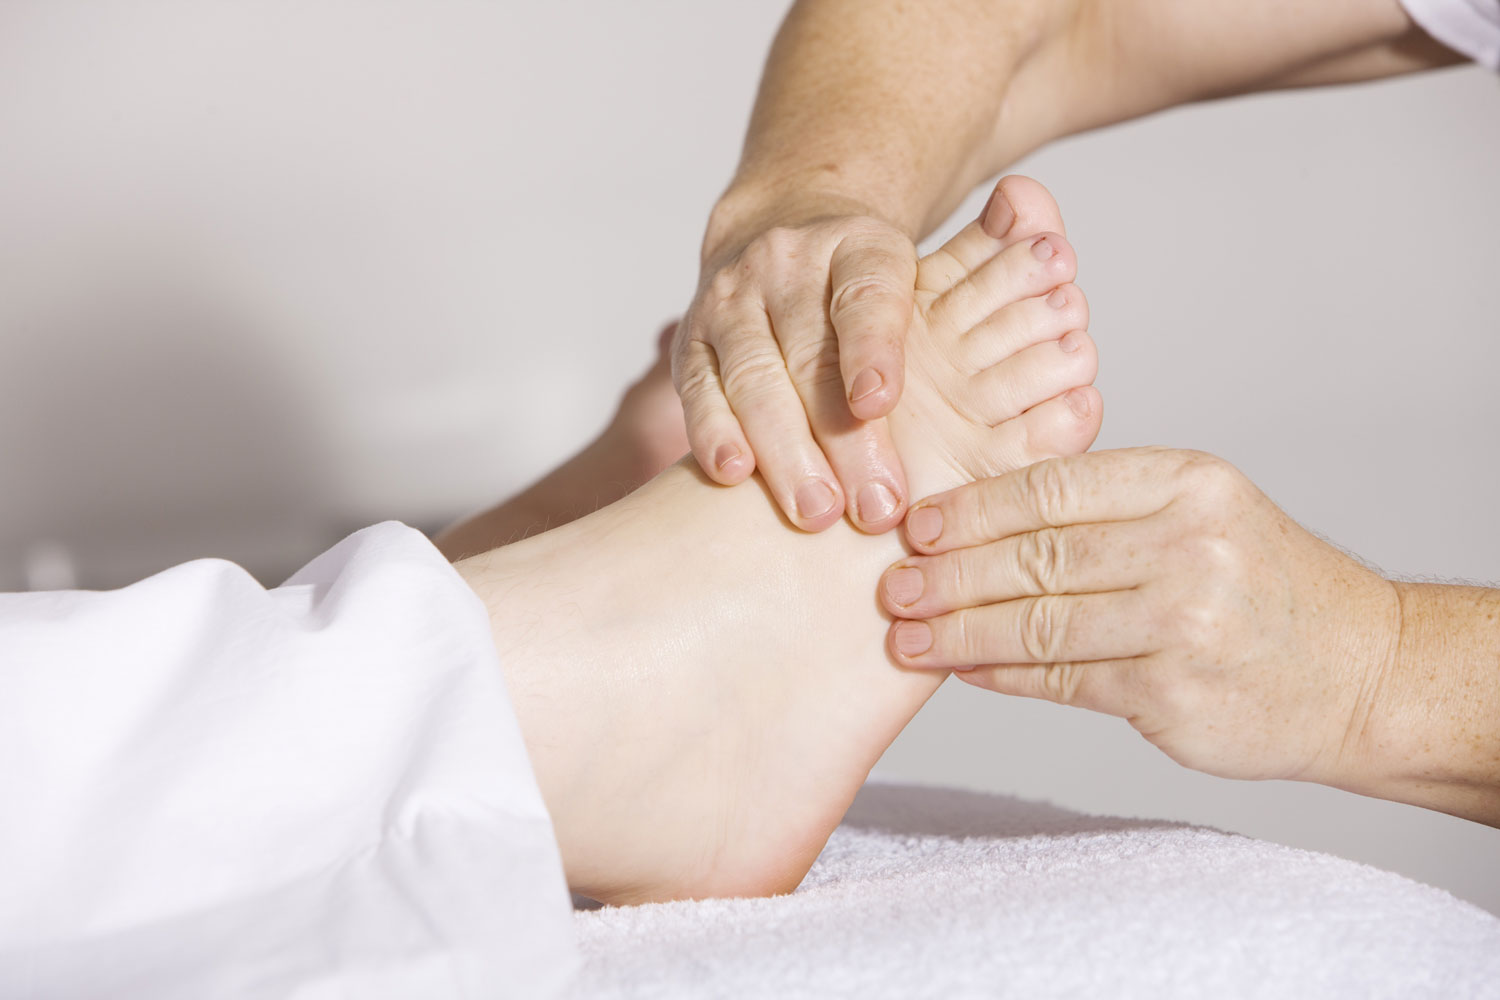 Chiropodist virtual pa (personal assistant) services